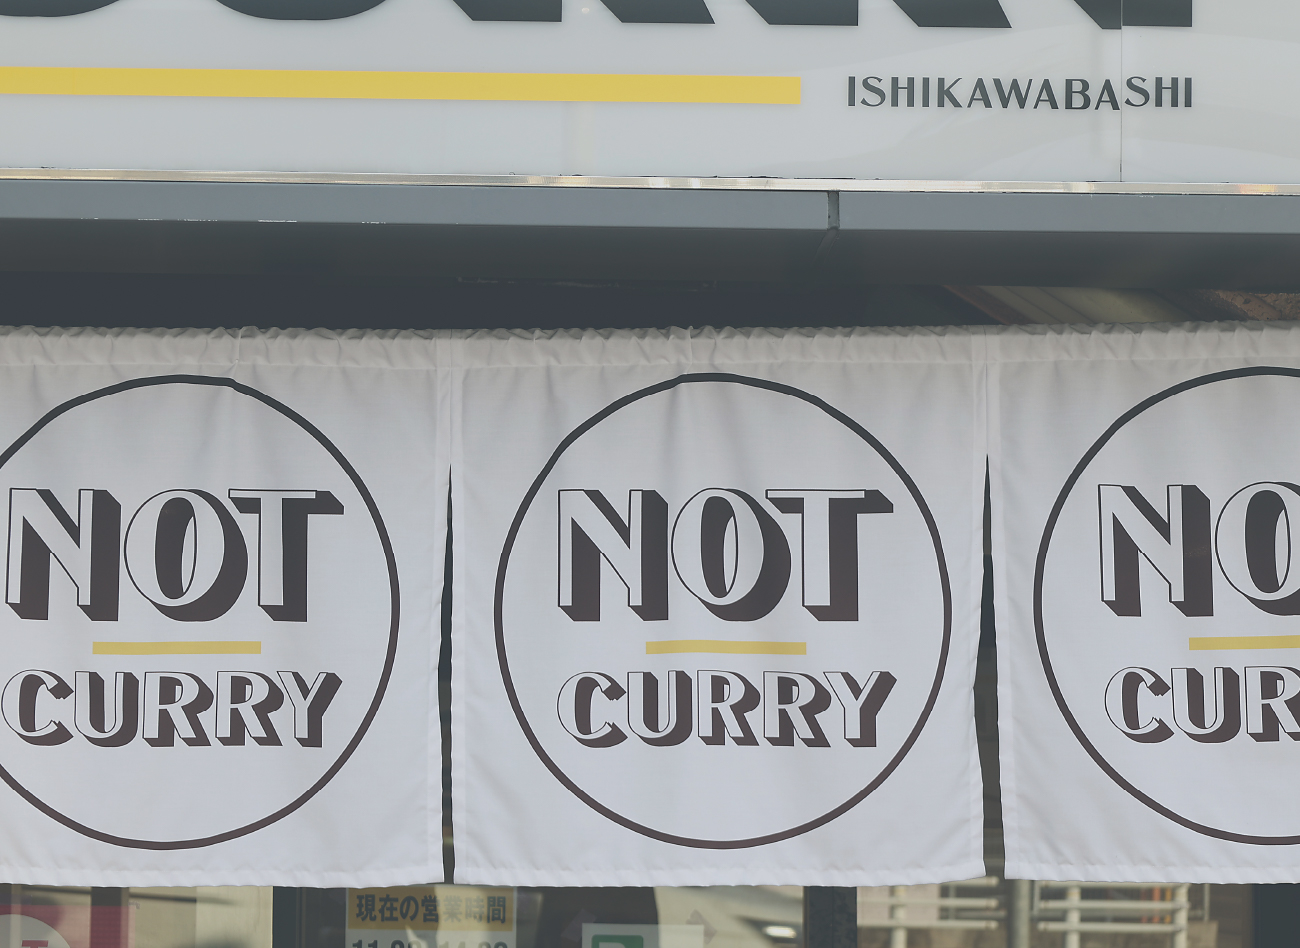 NOT CURRY